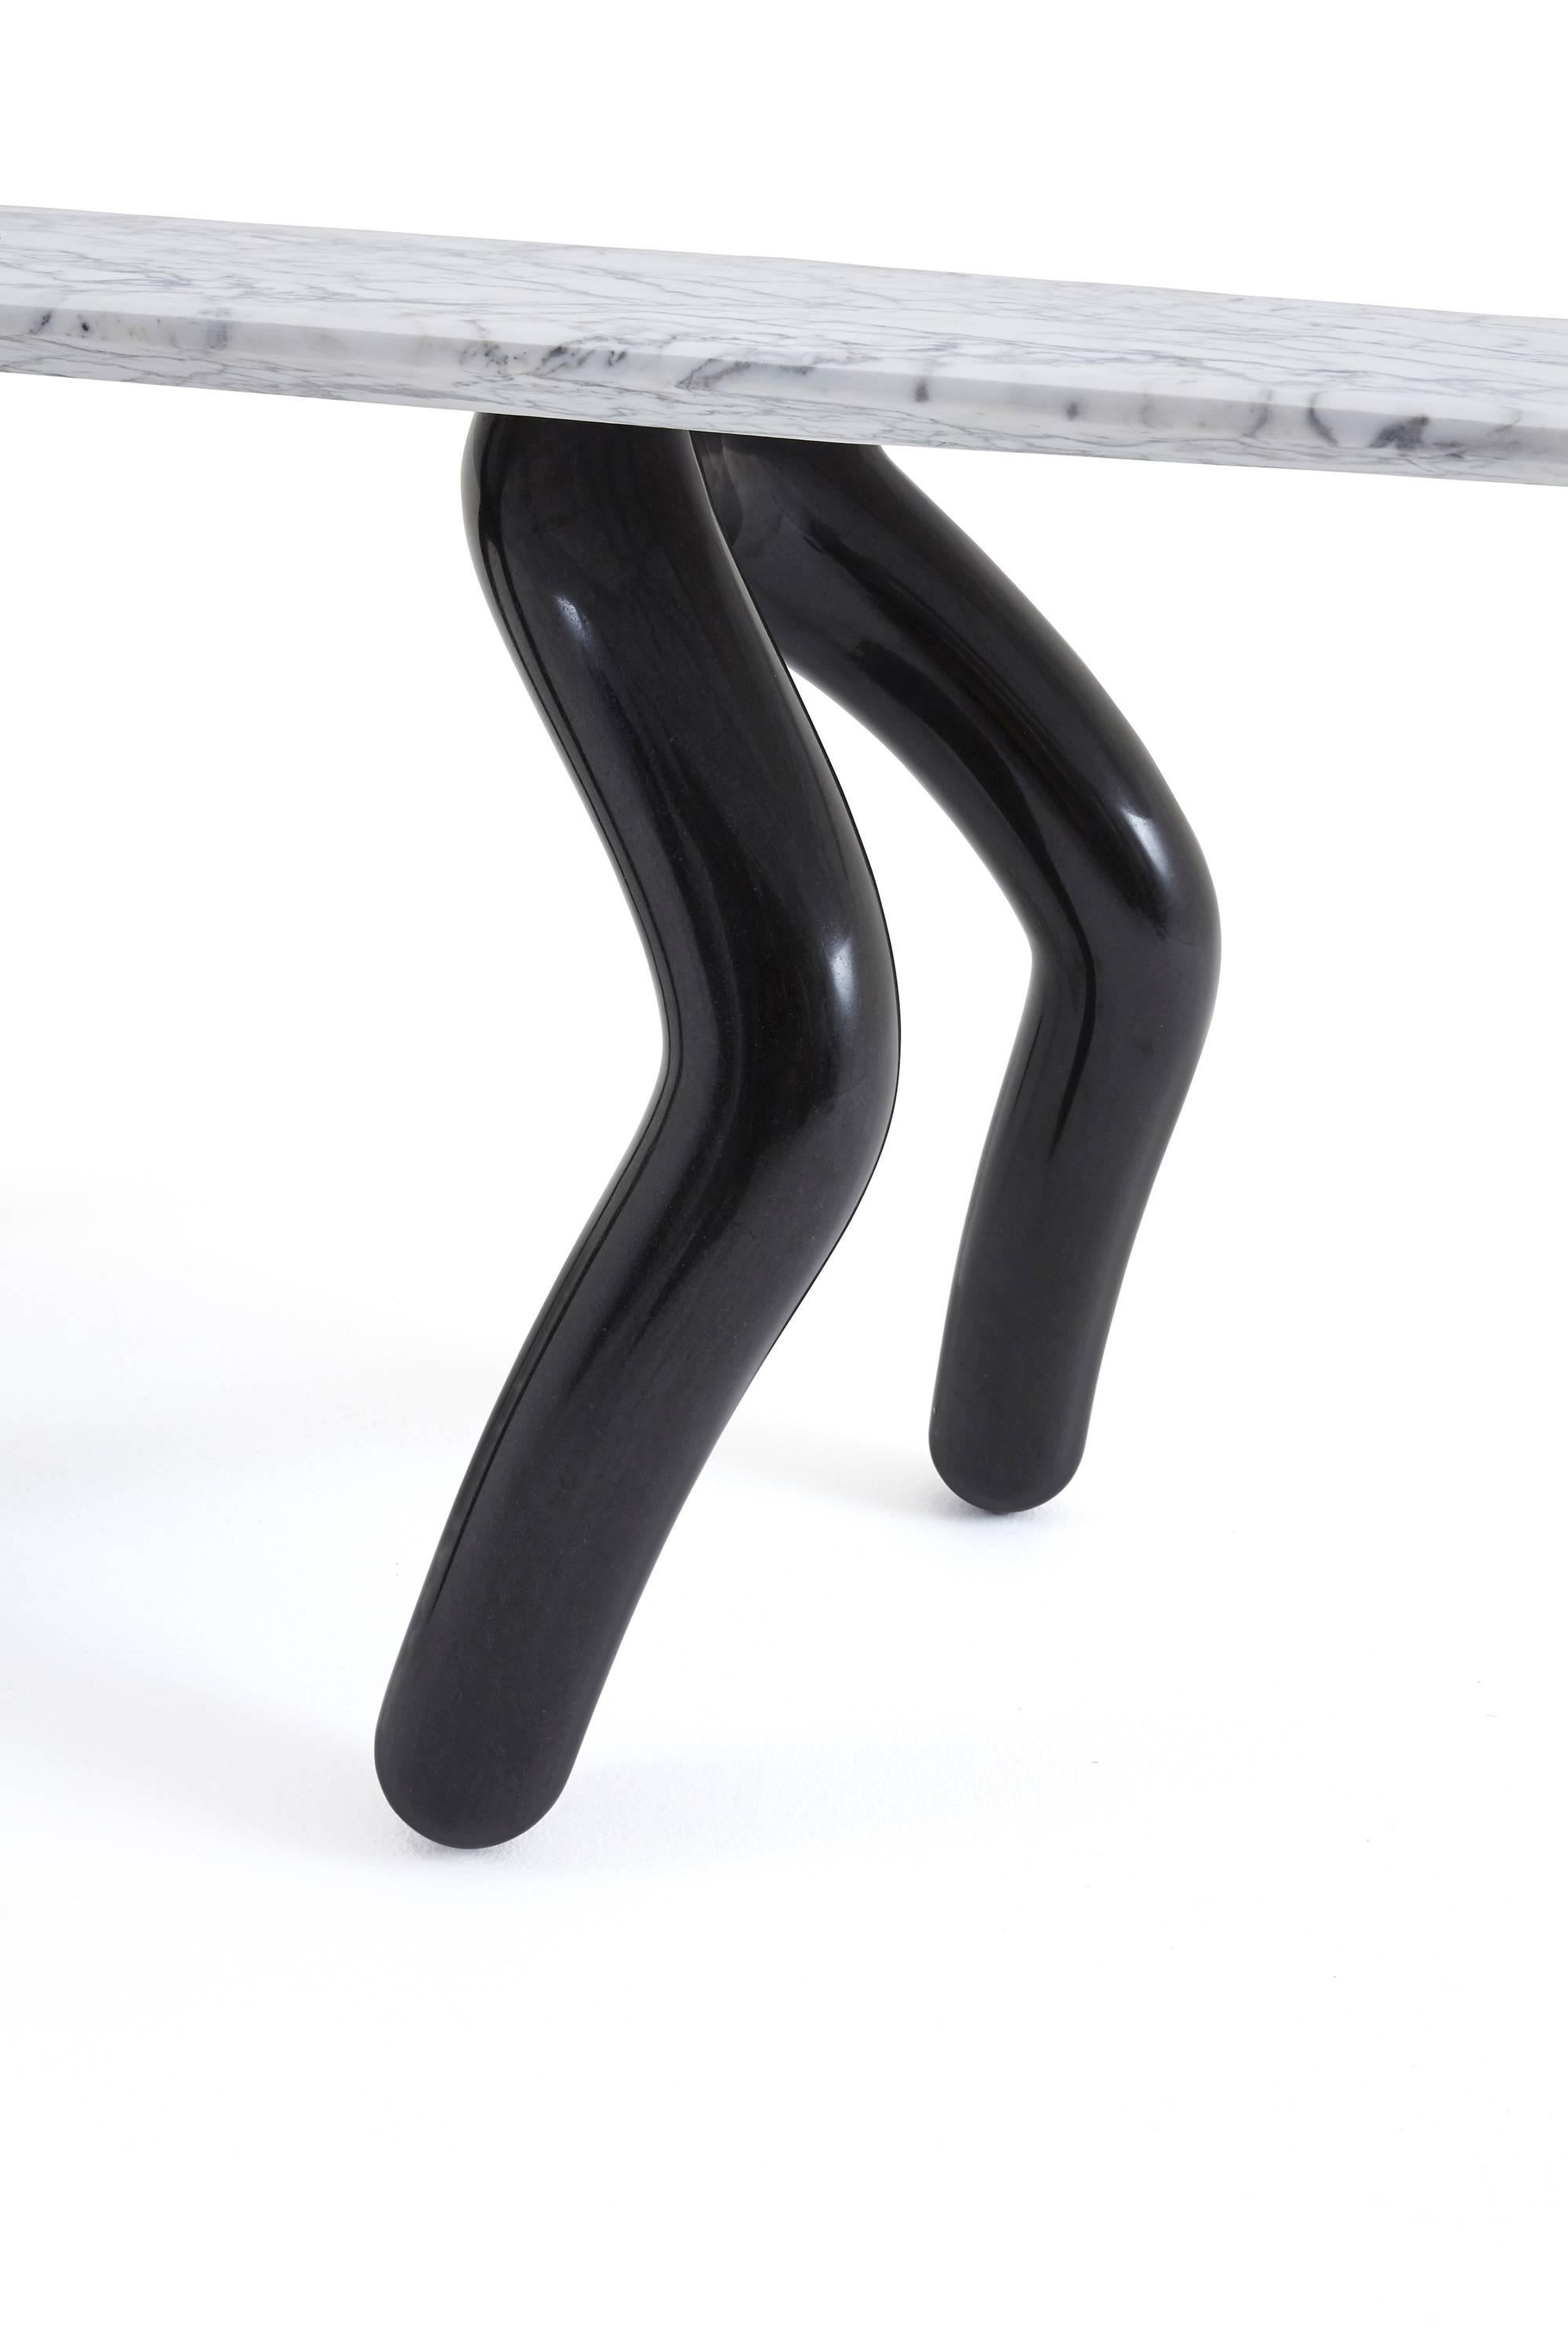 Modern Stepp Dining Table by Emmanuel Babled